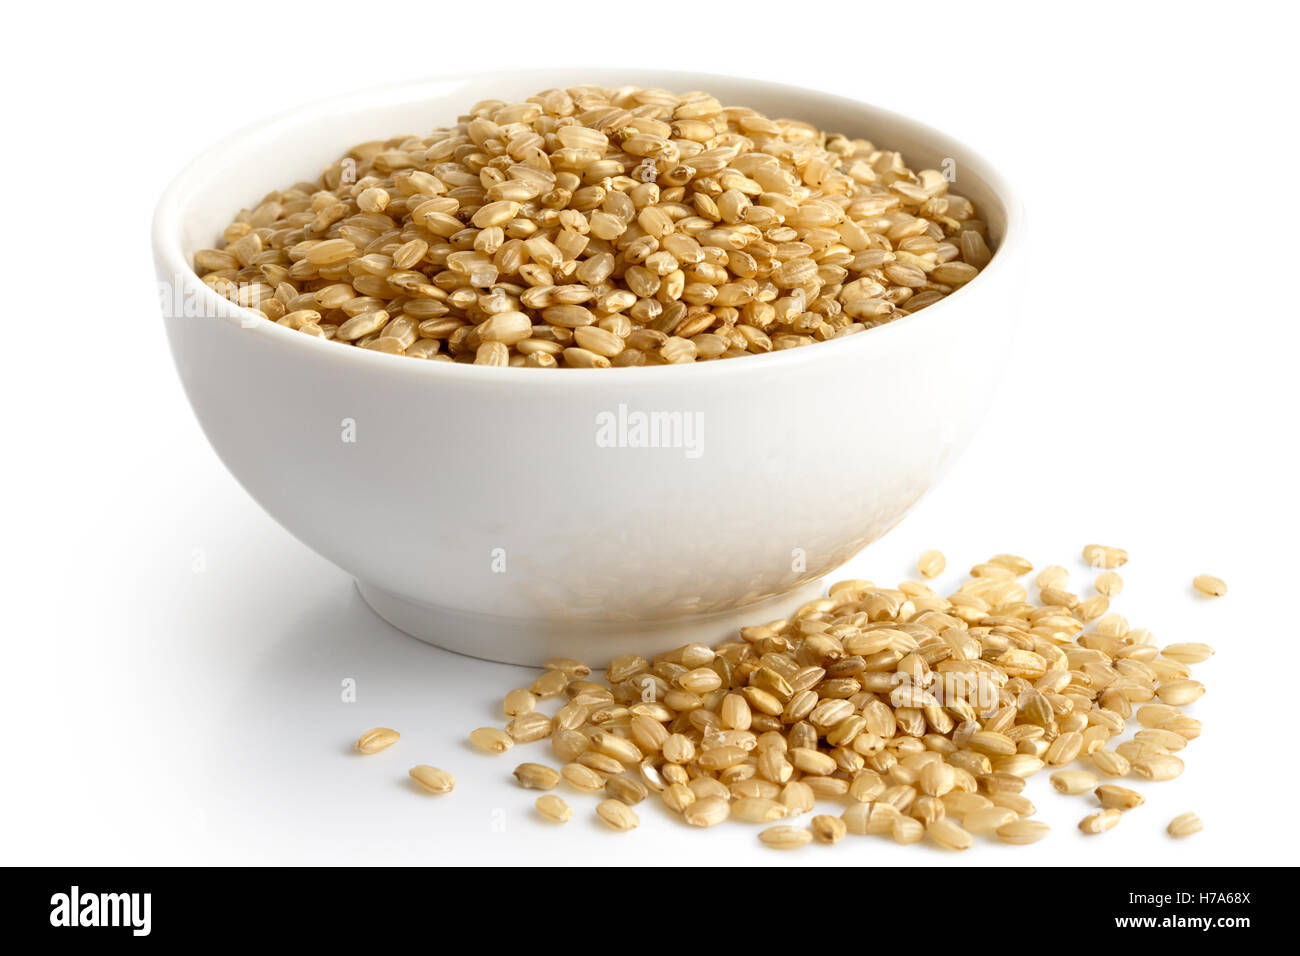 Bowl of short grain brown rice isolated on white. Spilled rice. Stock Photo